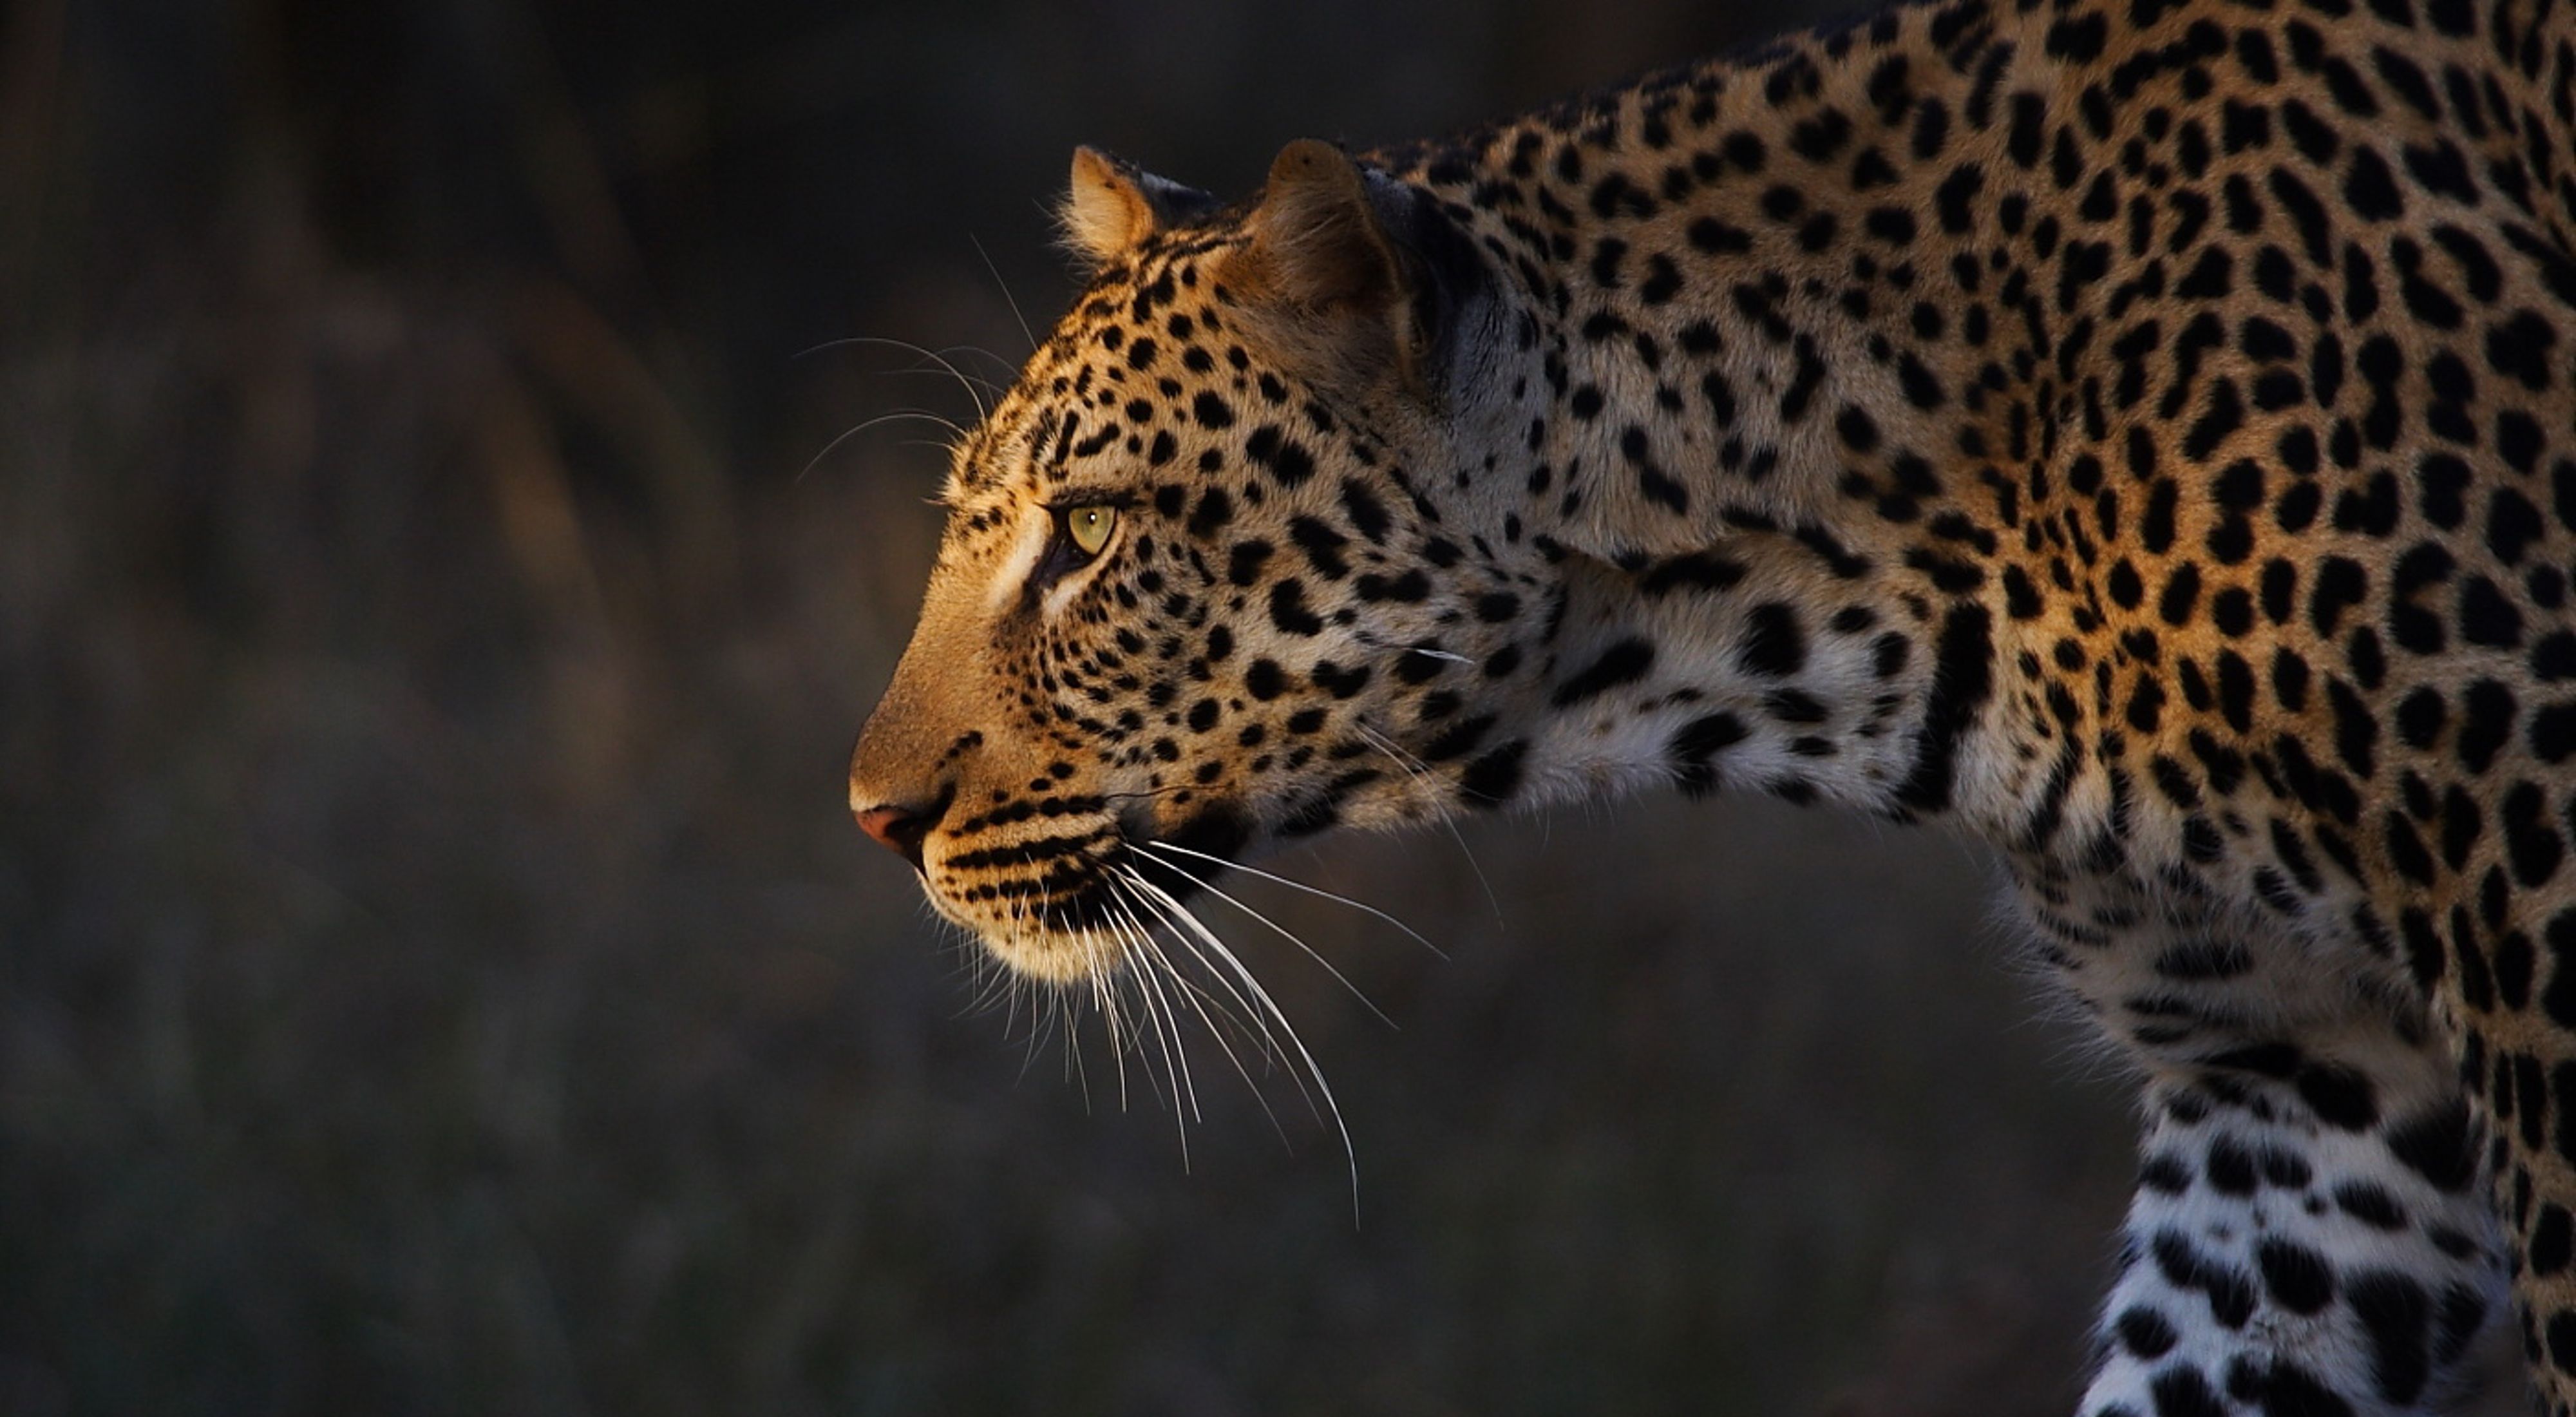 Close up of a leopard on the prowl in South Africa.